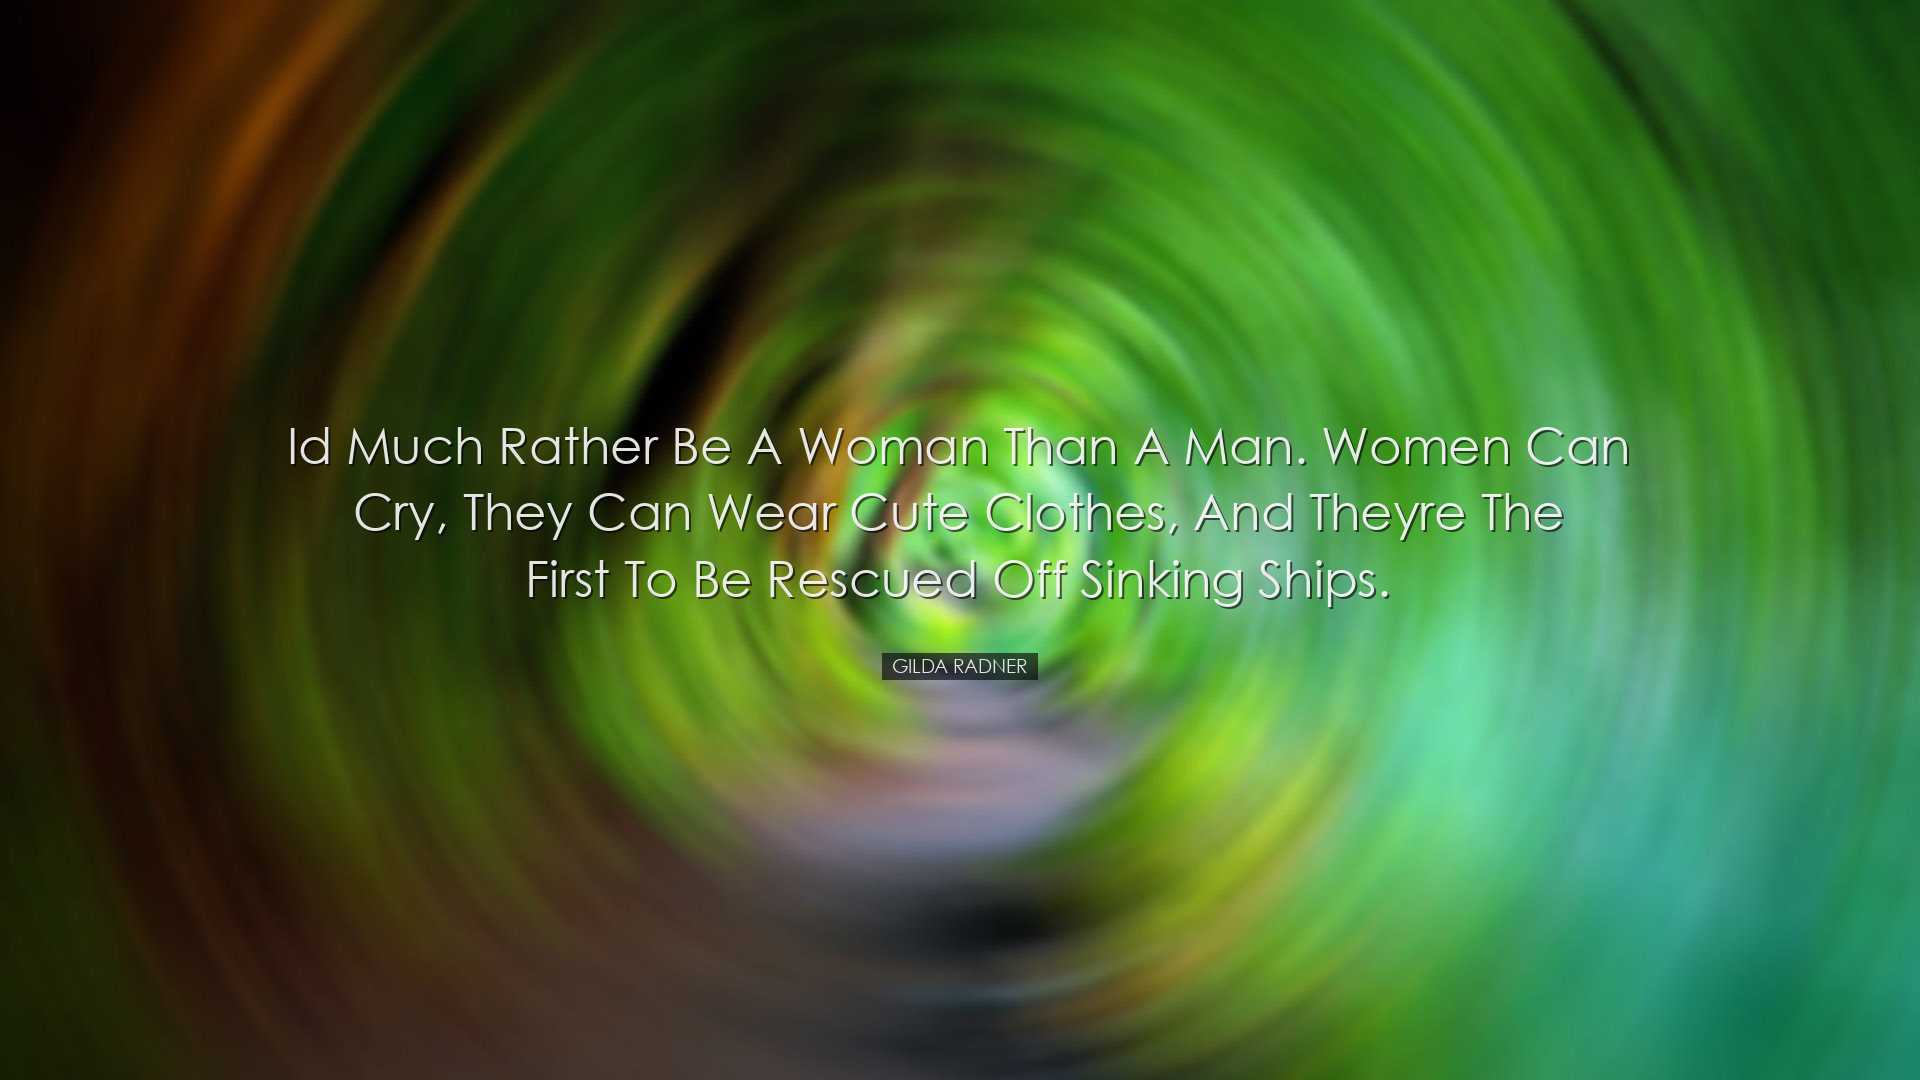 Id much rather be a woman than a man. Women can cry, they can wear